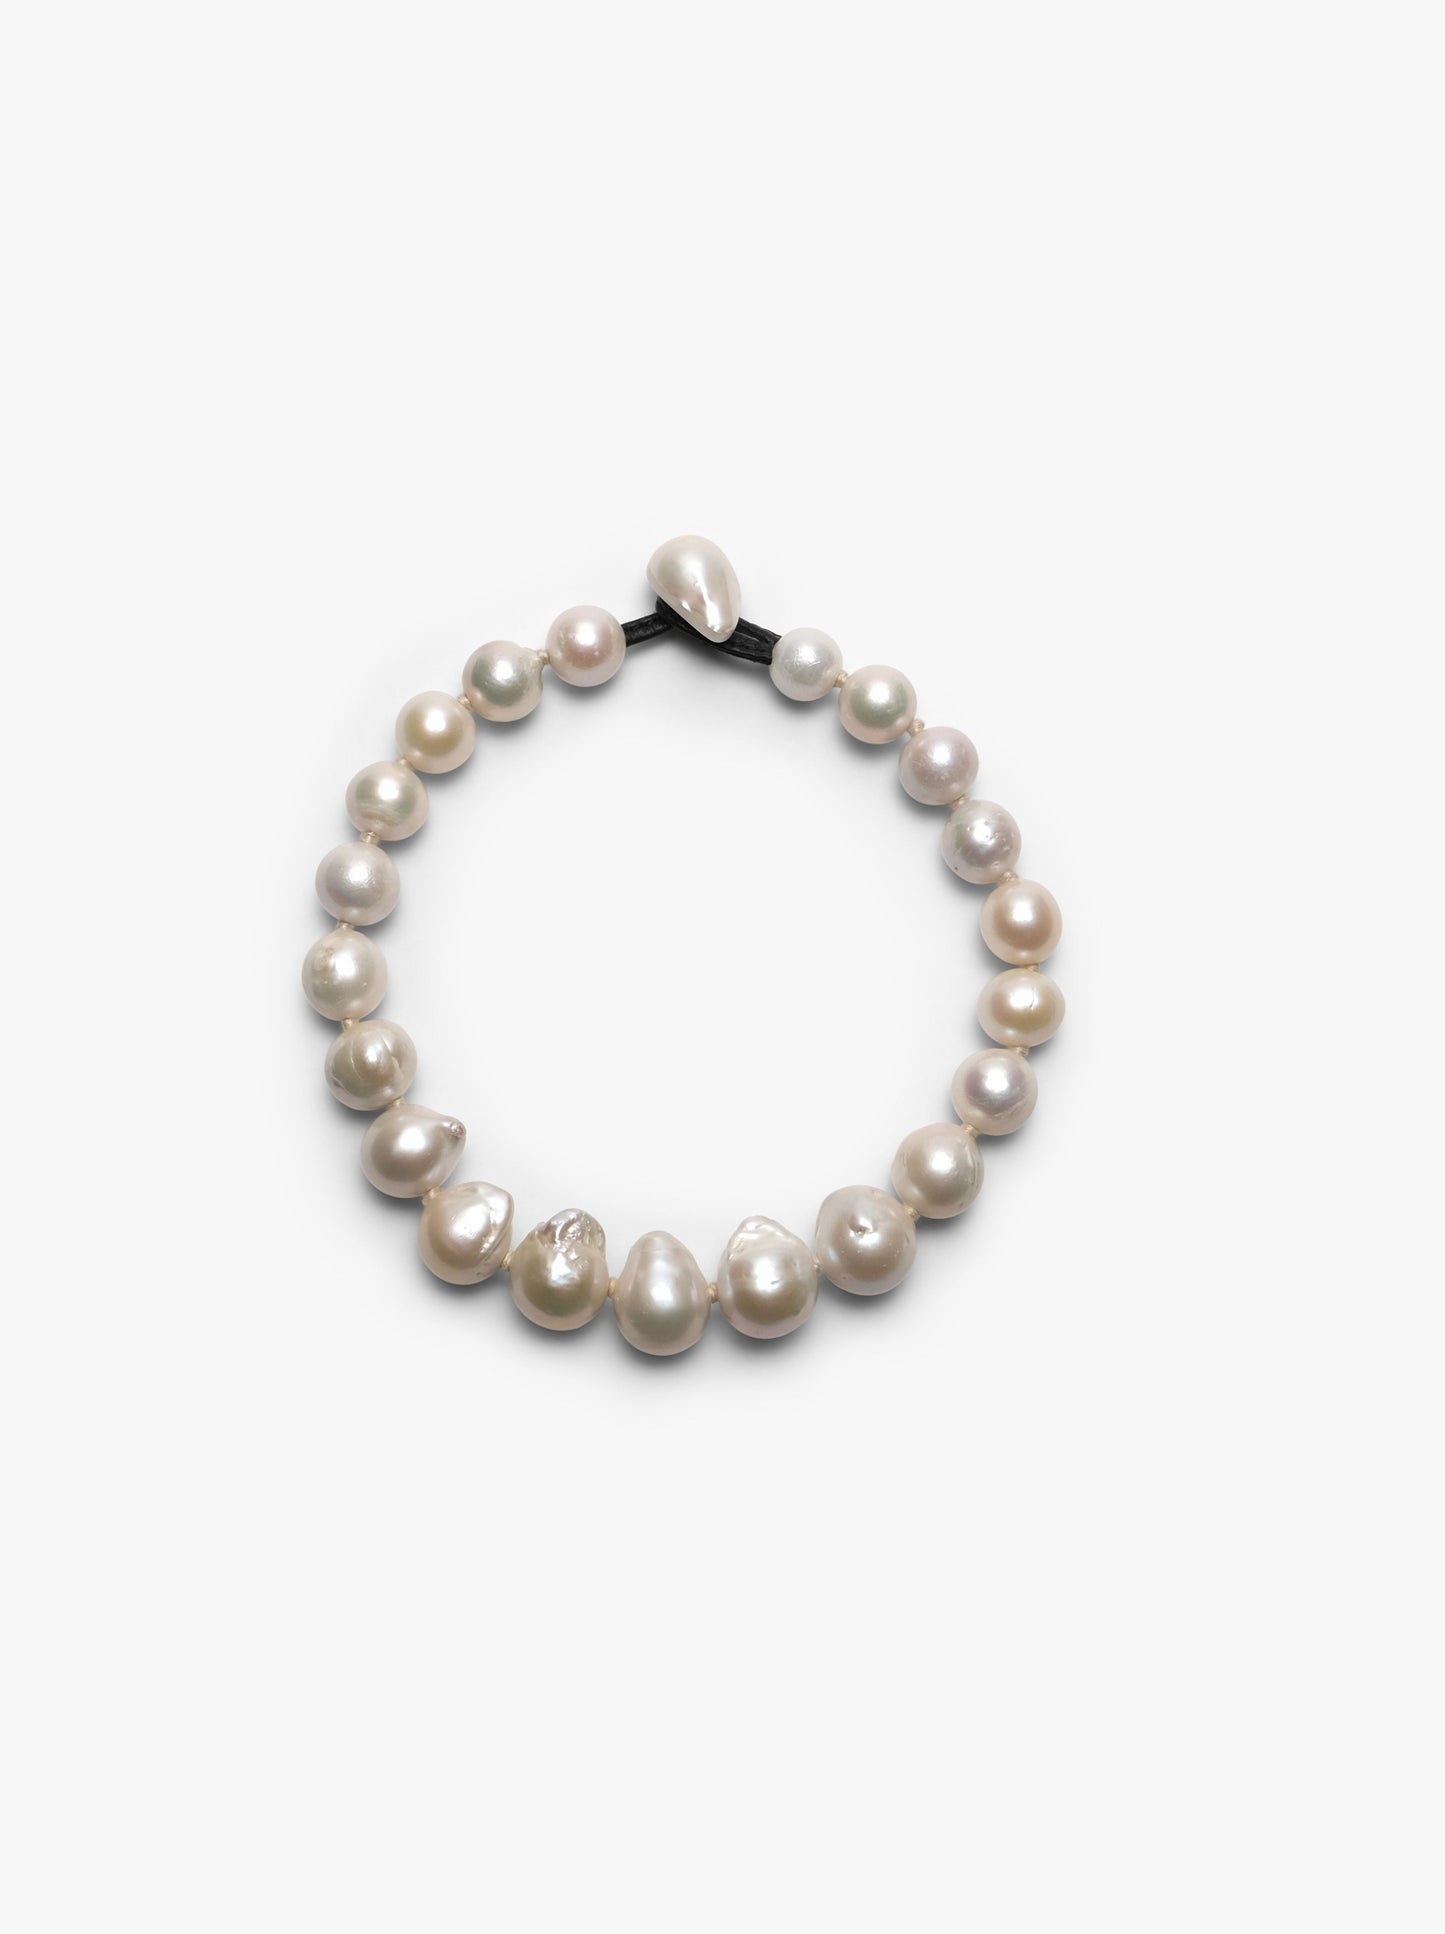 Necklace: baroque and freshwater pearls